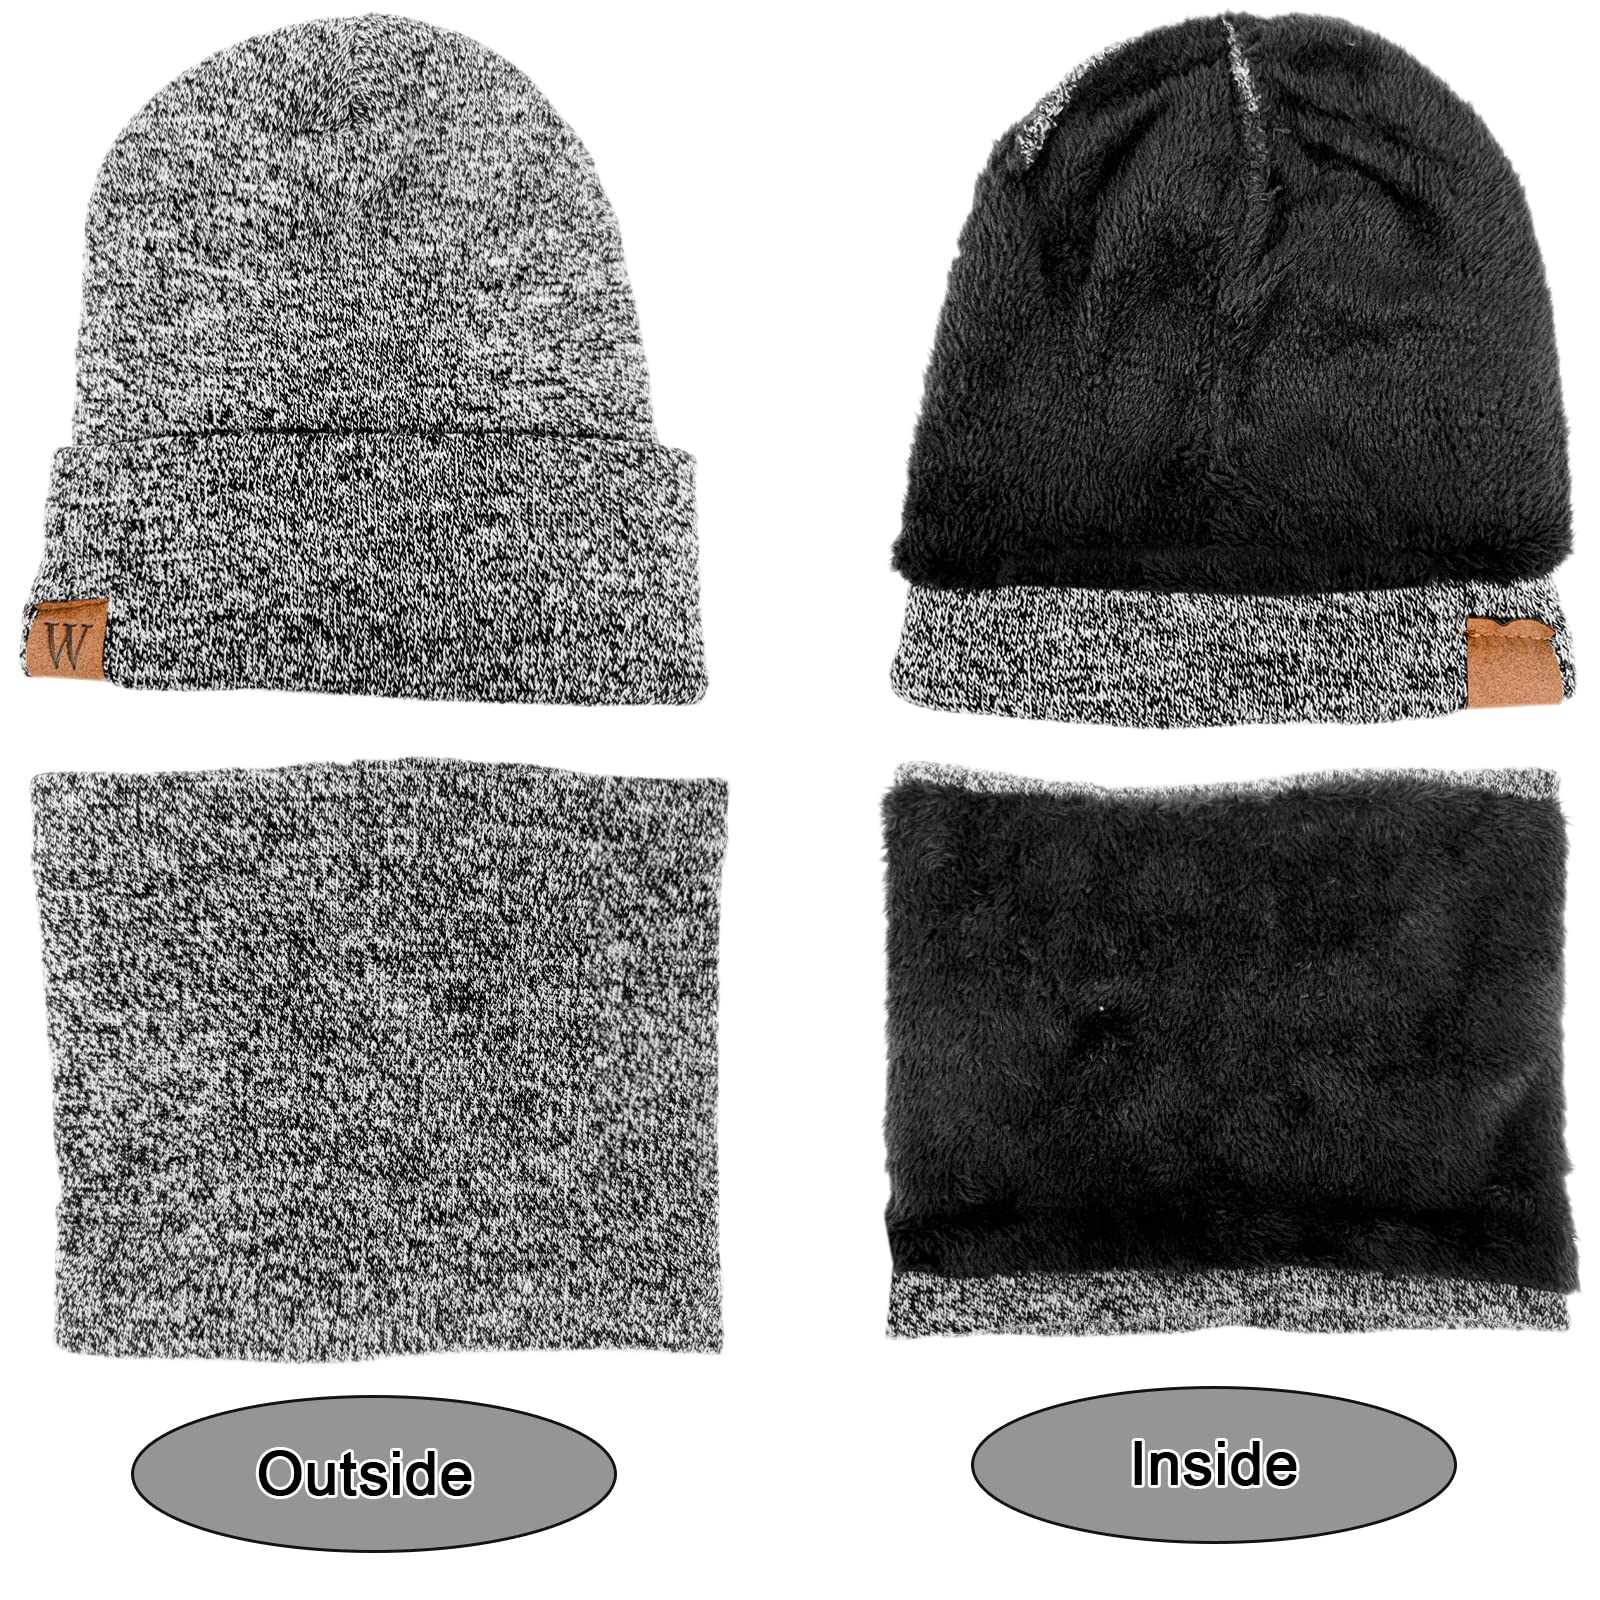 Mens Winter Hat Scarf Gloves 3 in 1, Fleece Lined Thick Warm Beanie Hats Set, Knit Slouchy Skull Caps (Grey)